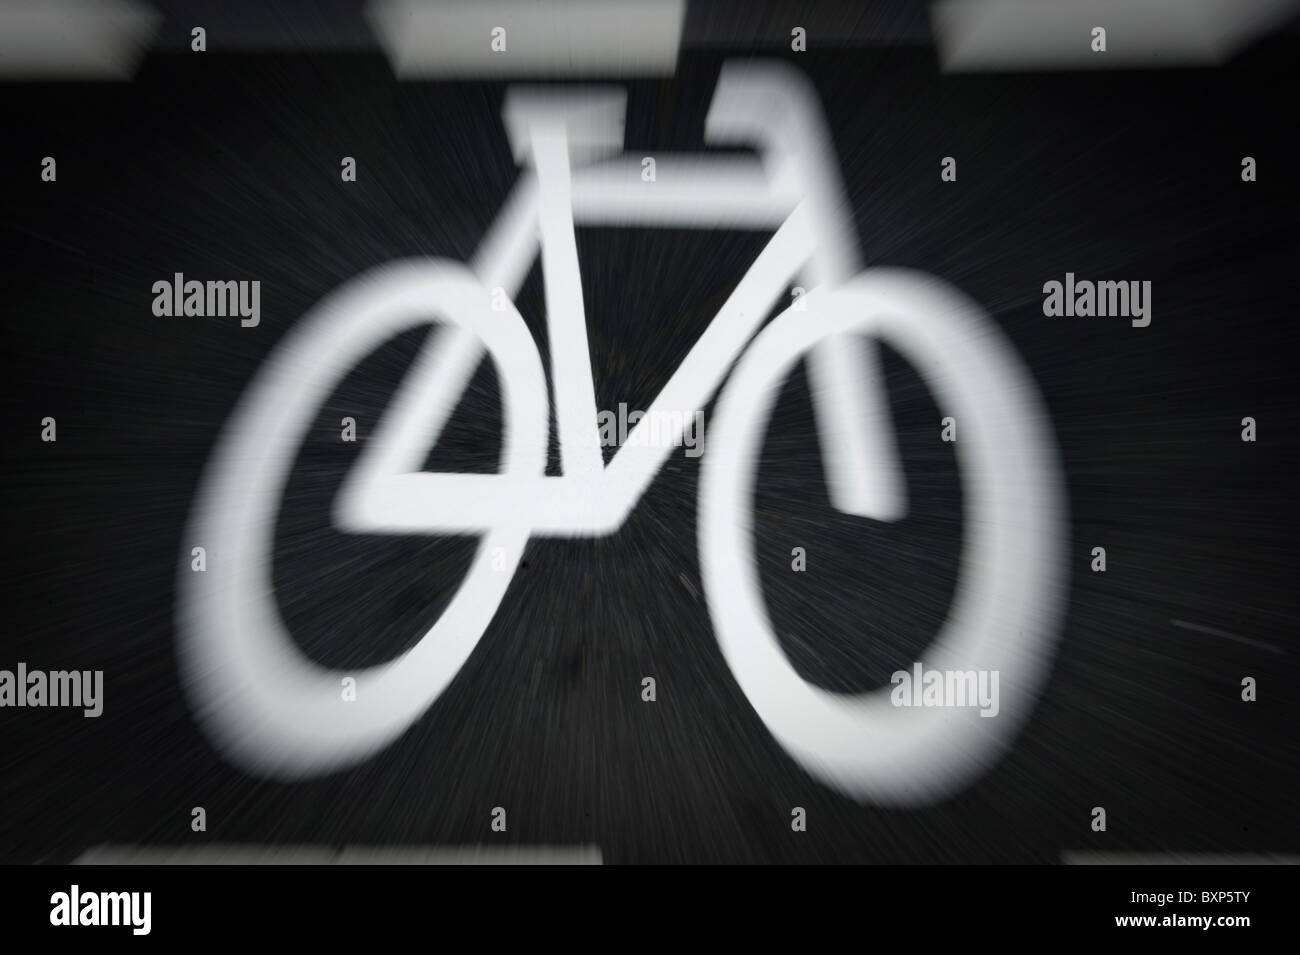 A pictogram of a bike in a bicycle path, Berlin, Germany Stock Photo